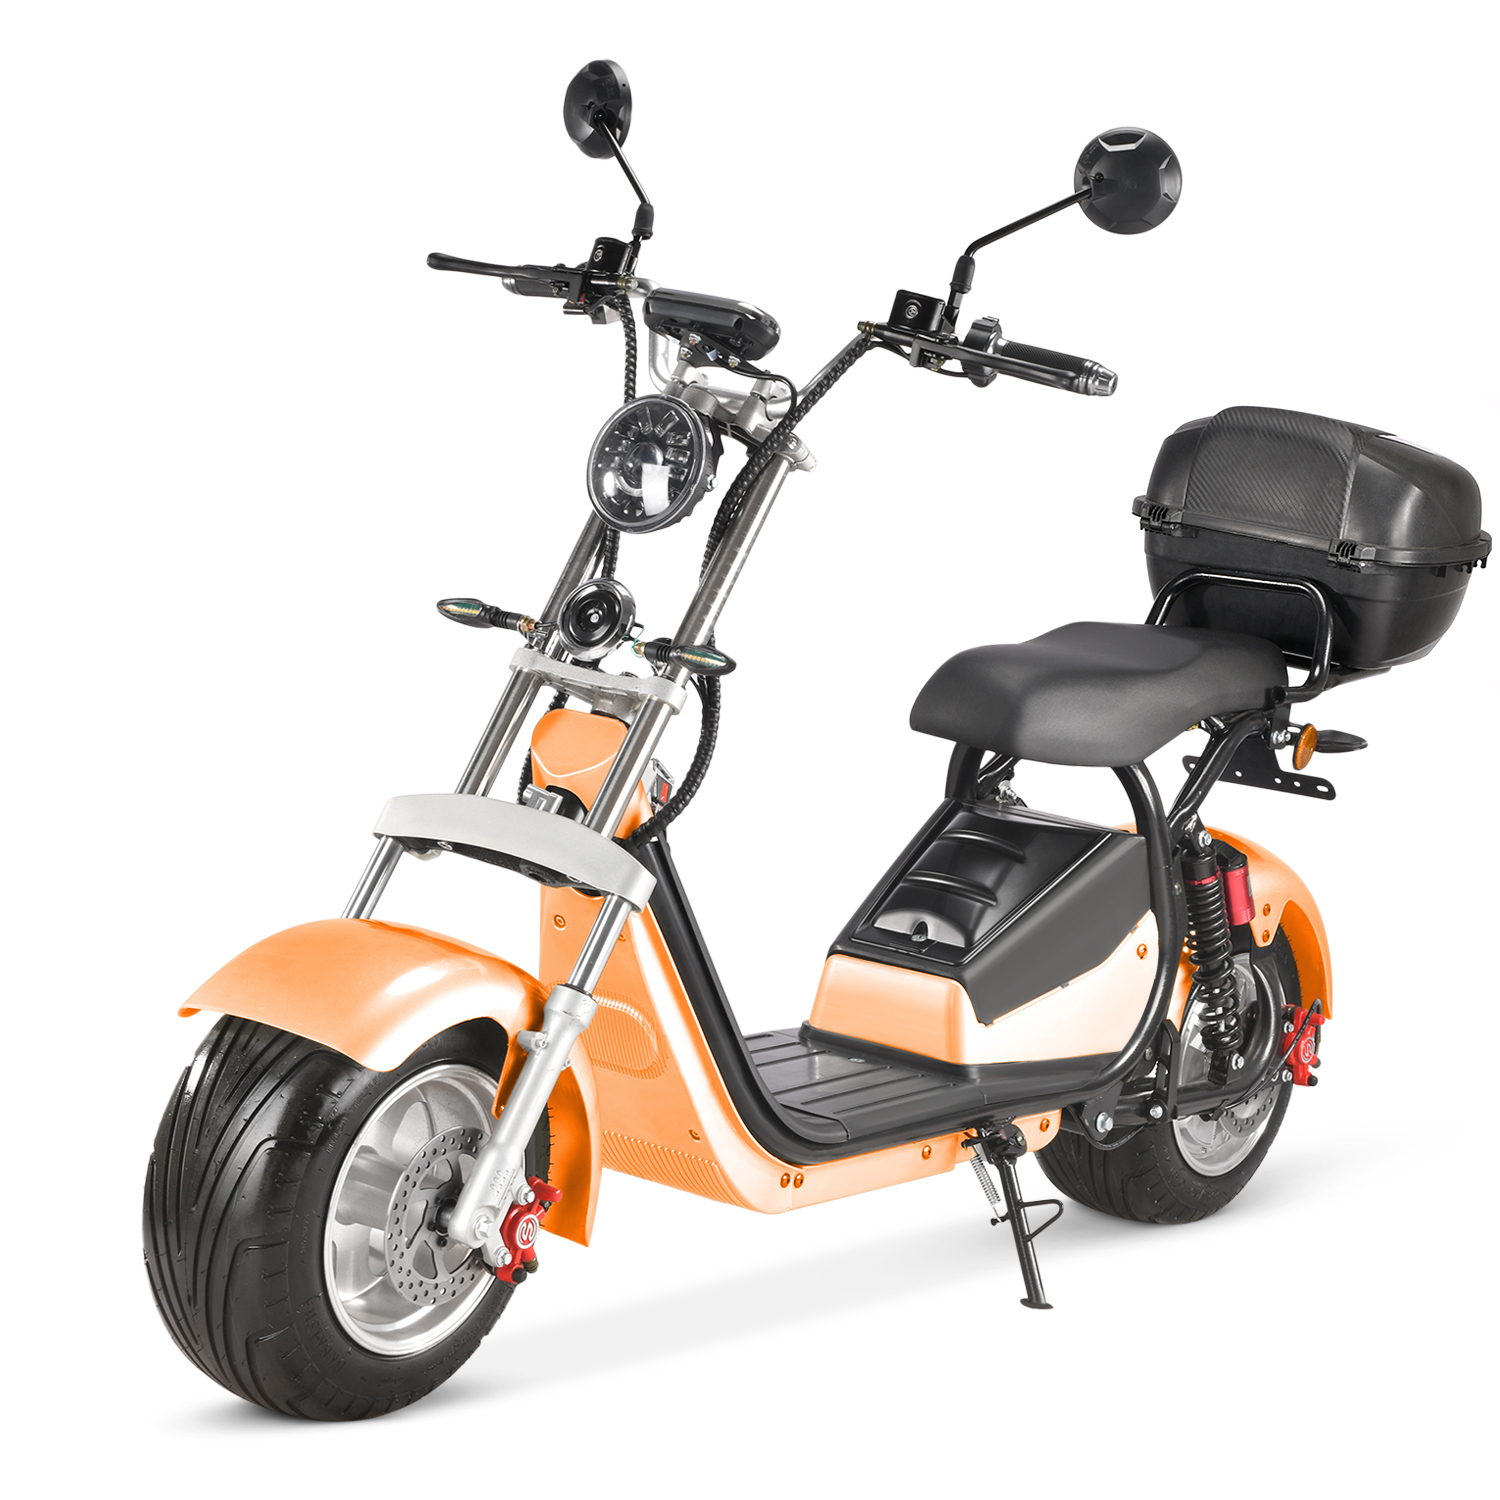 CF-CP-5 Electric Motor Cycle